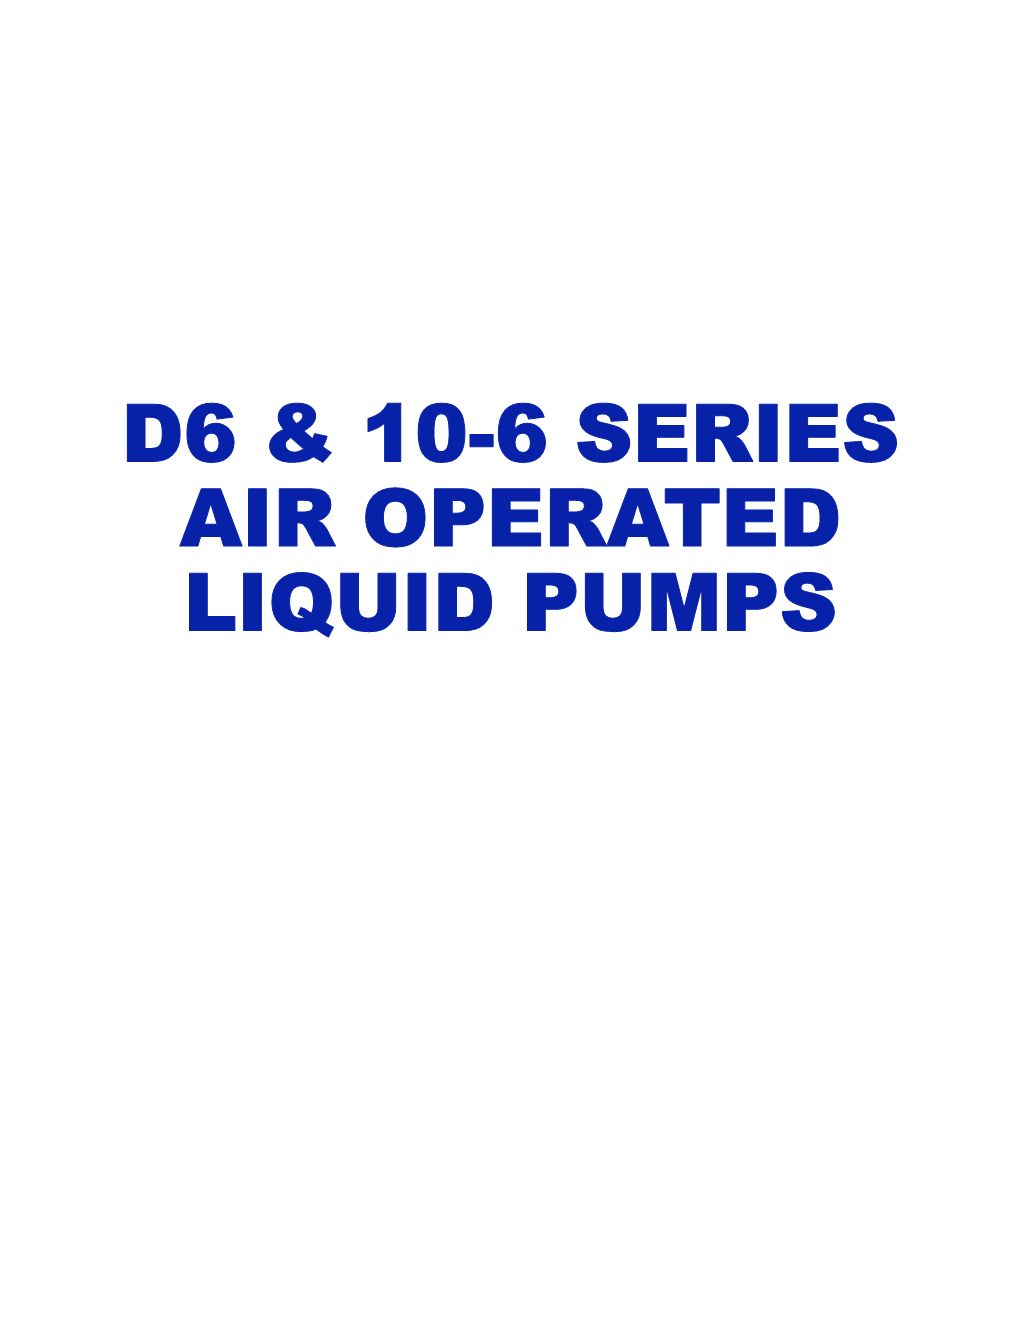 D6 and 10-6 Series Air Operated Liquid Pumps